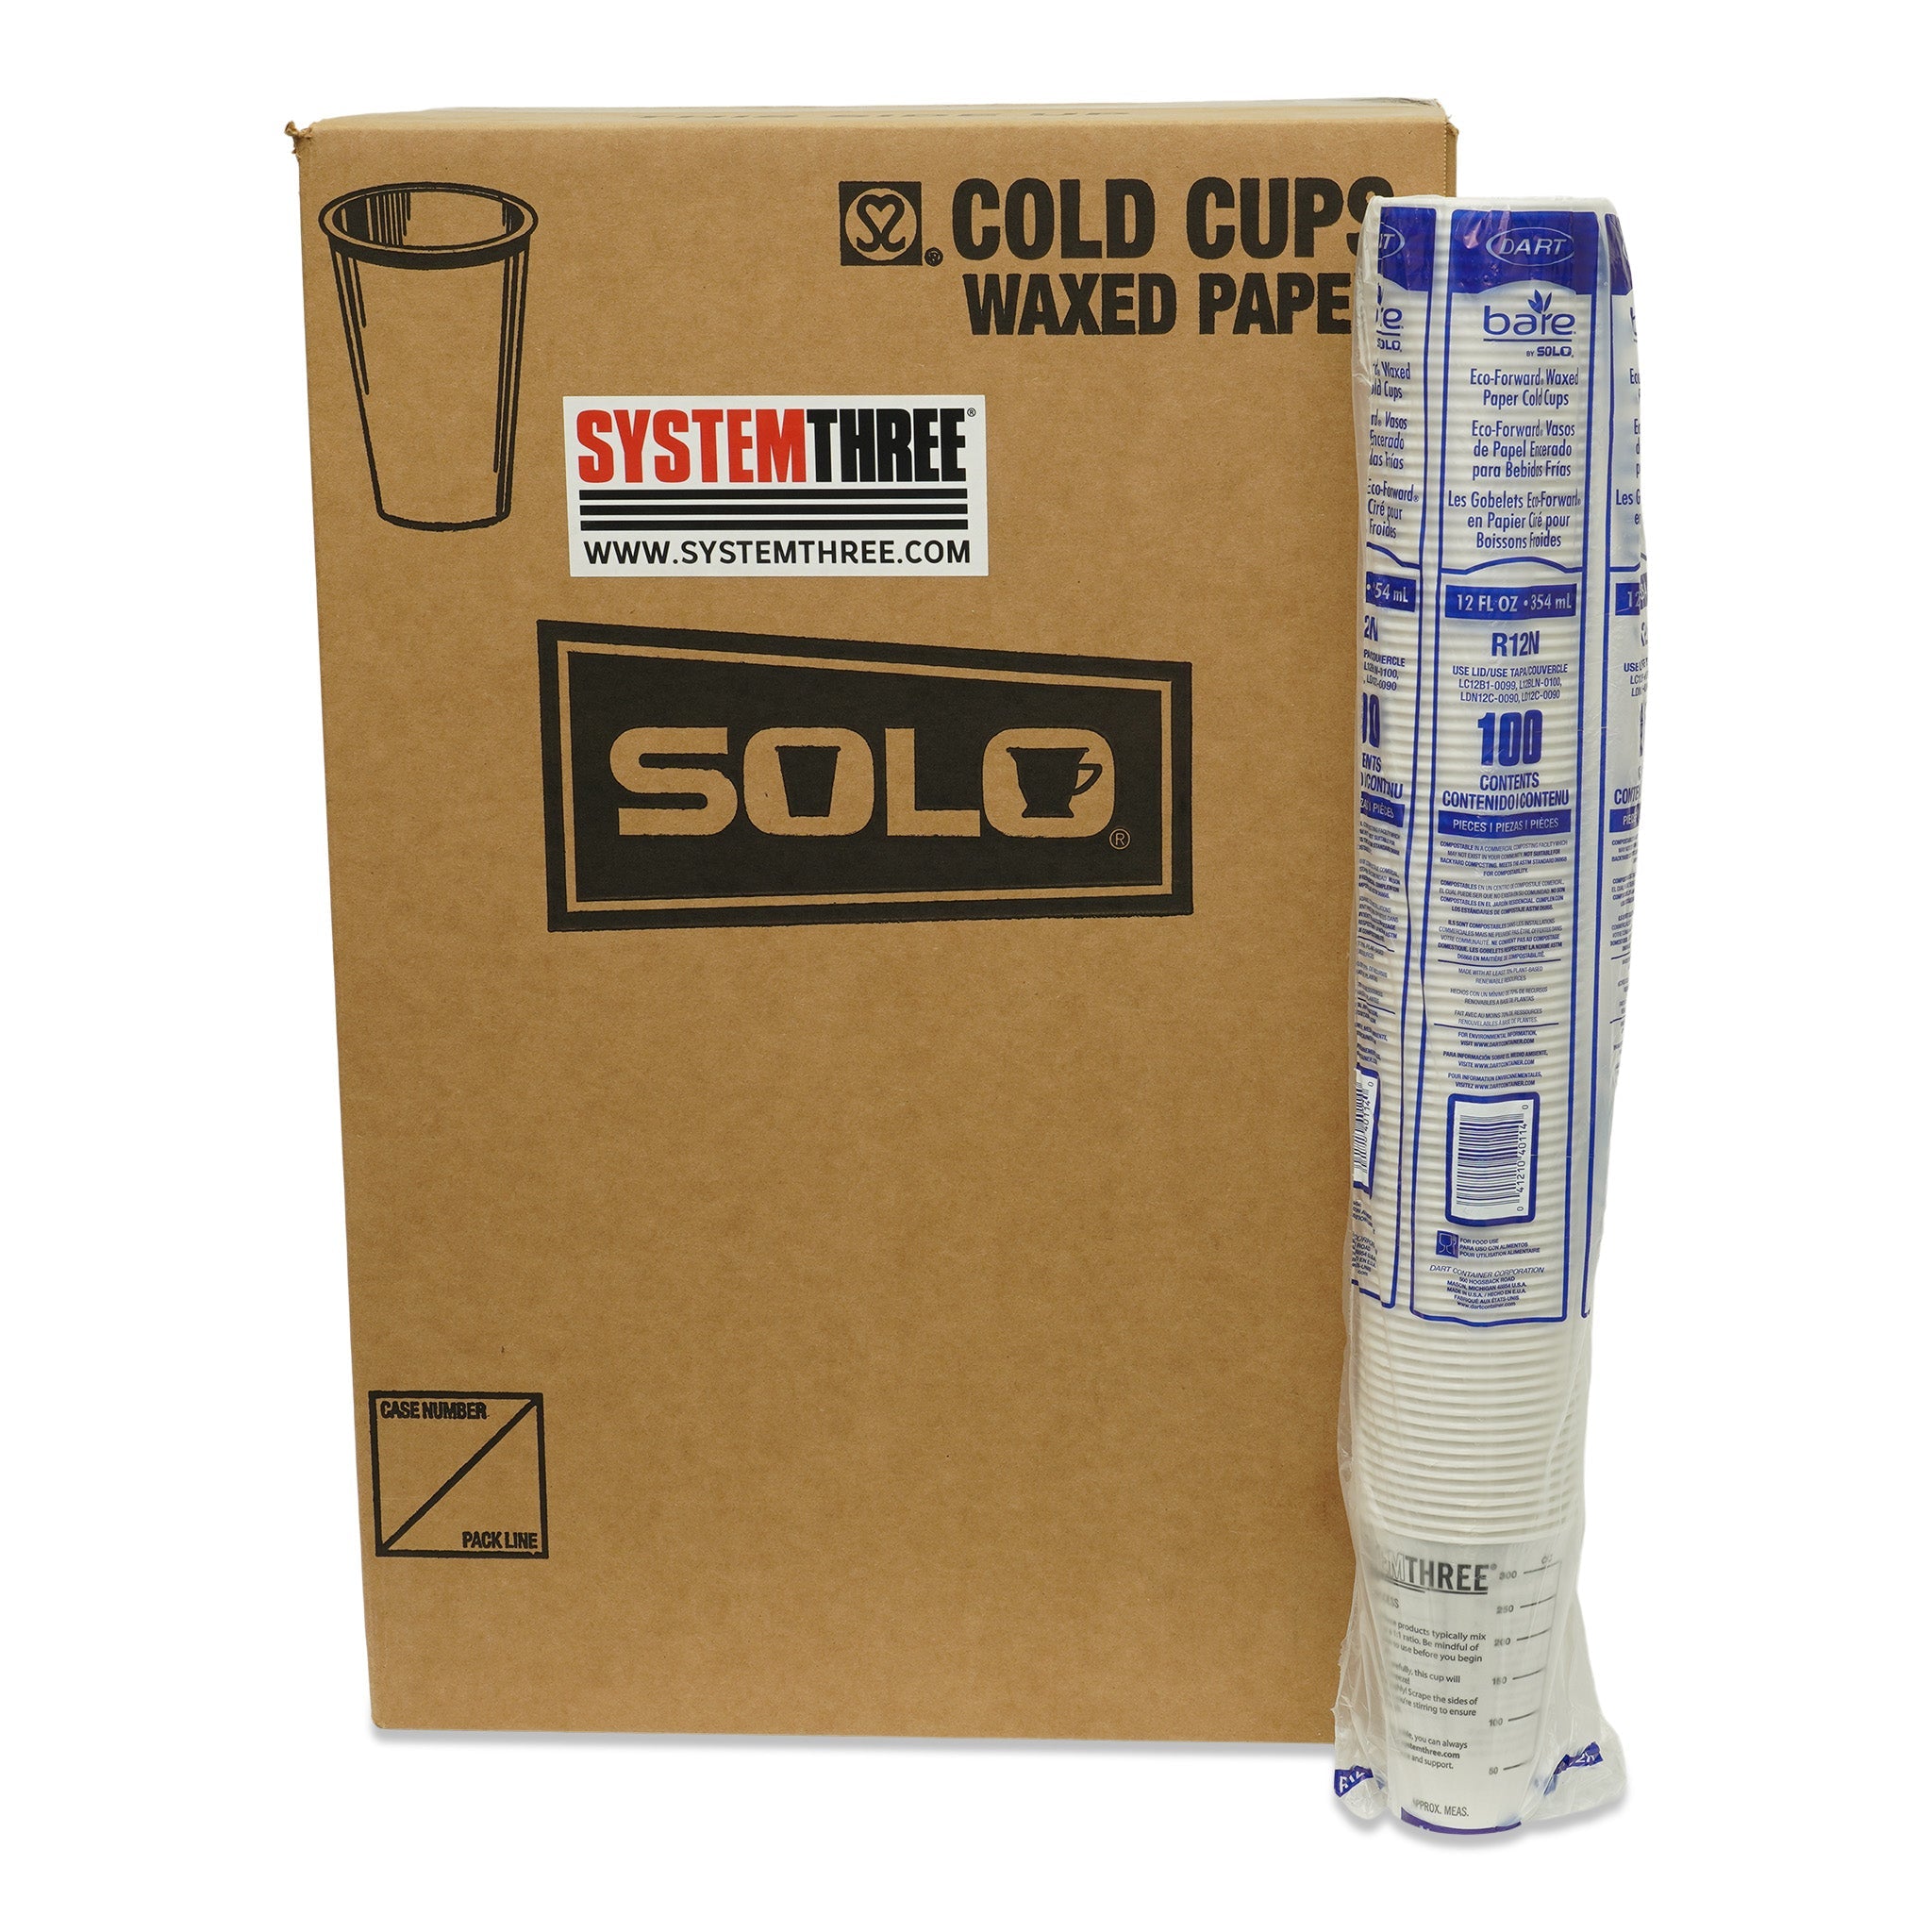 Solo White Paper Water Cups, 3 oz, 100/Pack